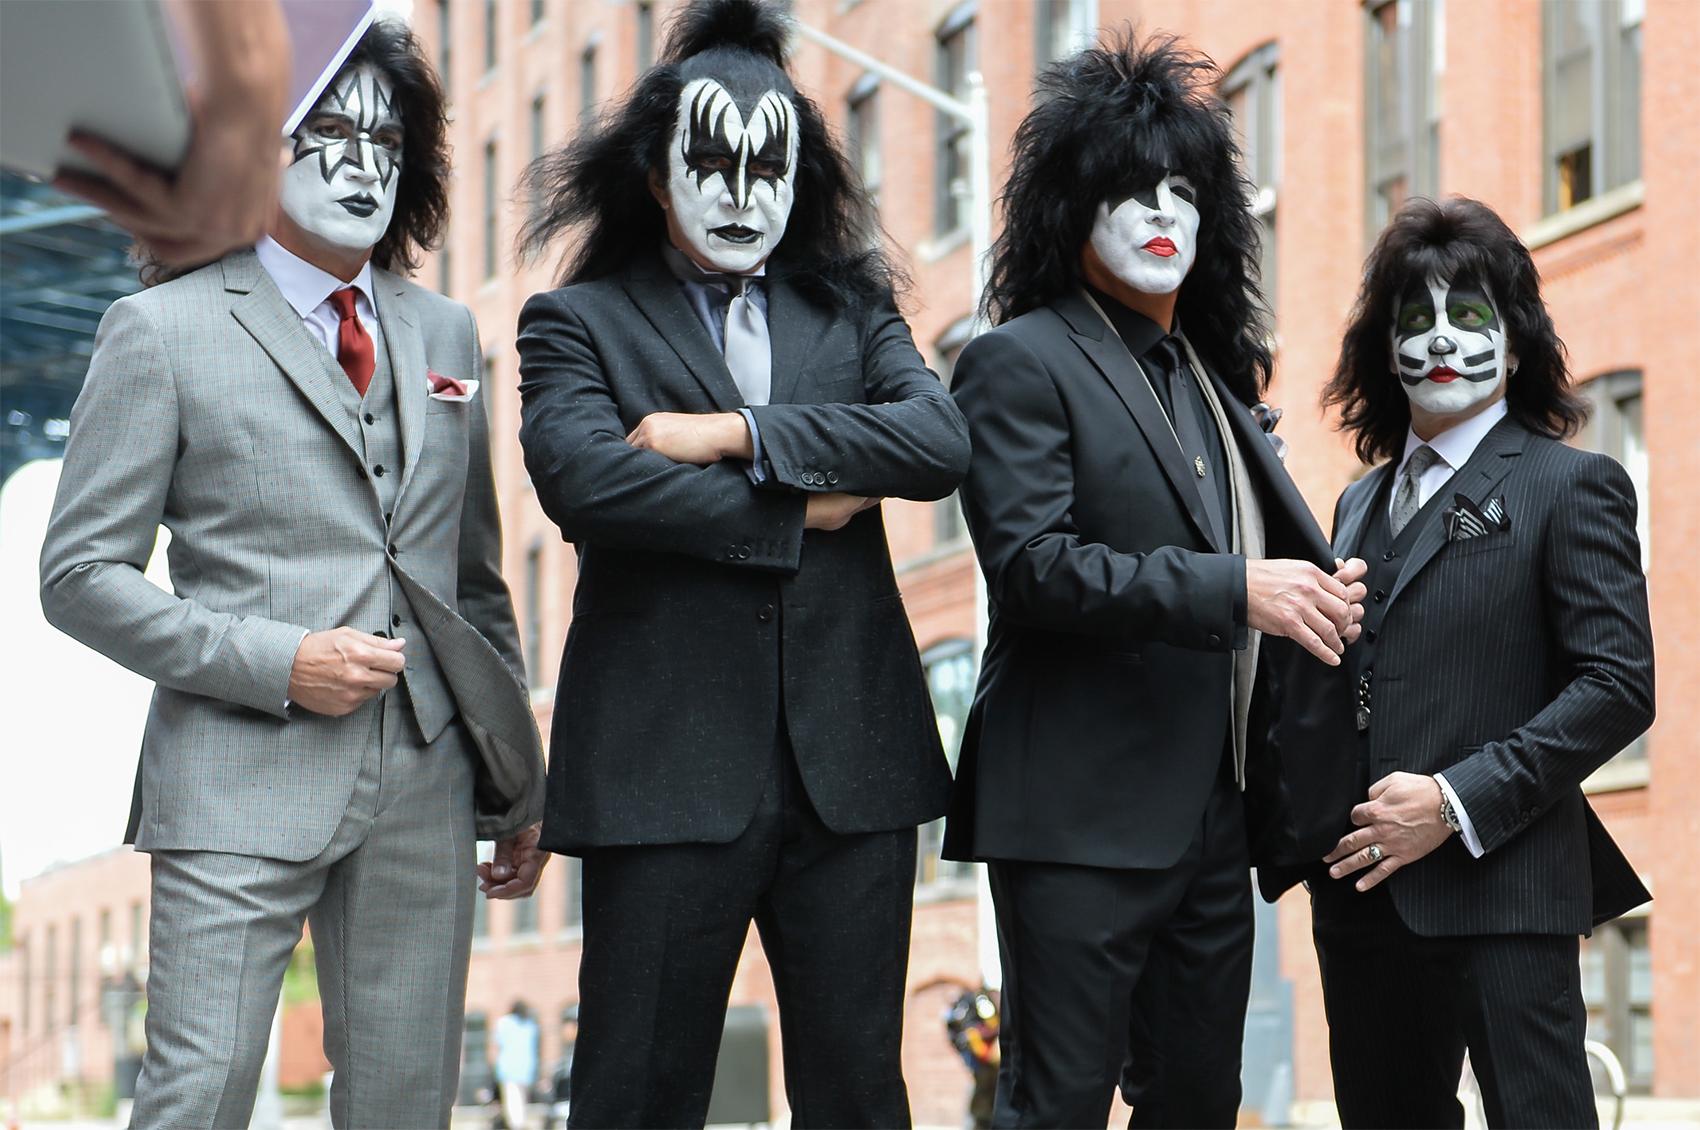 Paul Stanley, Gene Simmons, Eric Singer and Tommy Thayer i Kiss.